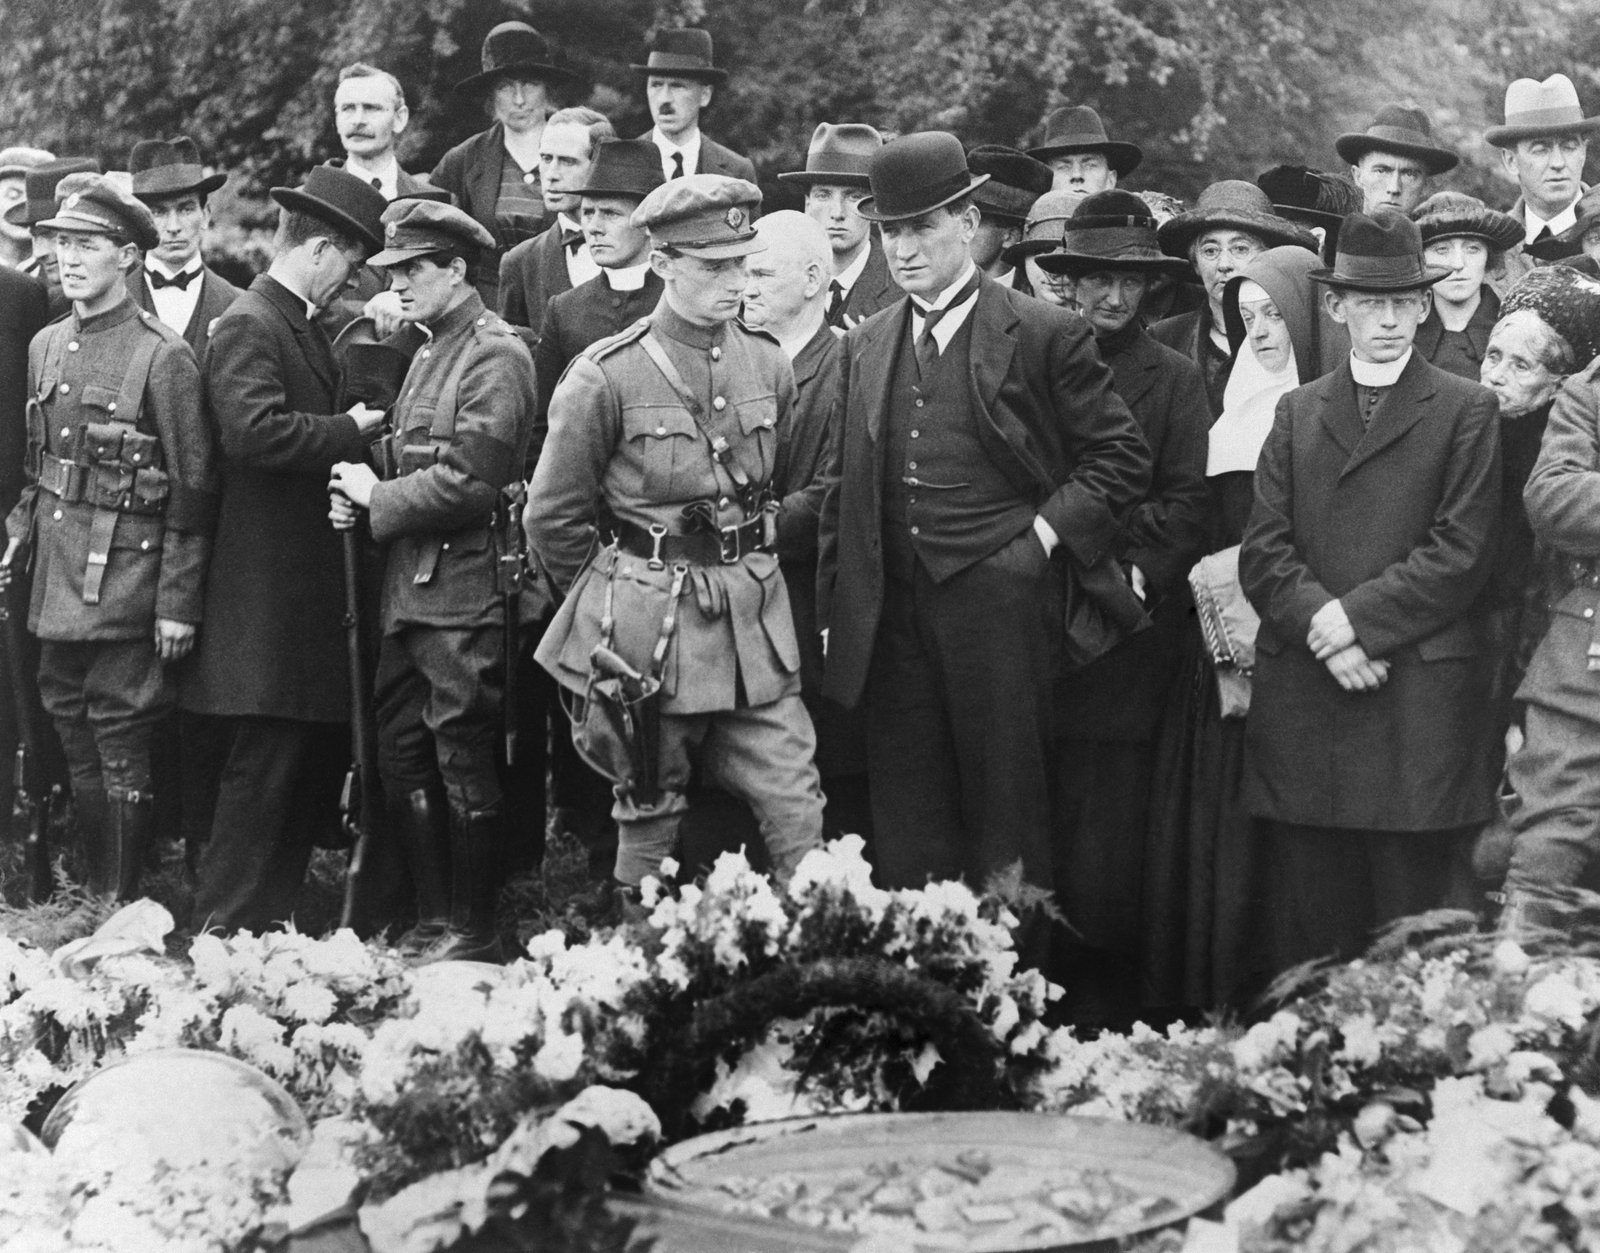 Image - Graveside (Pic: National Library of Ireland/Getty Images)